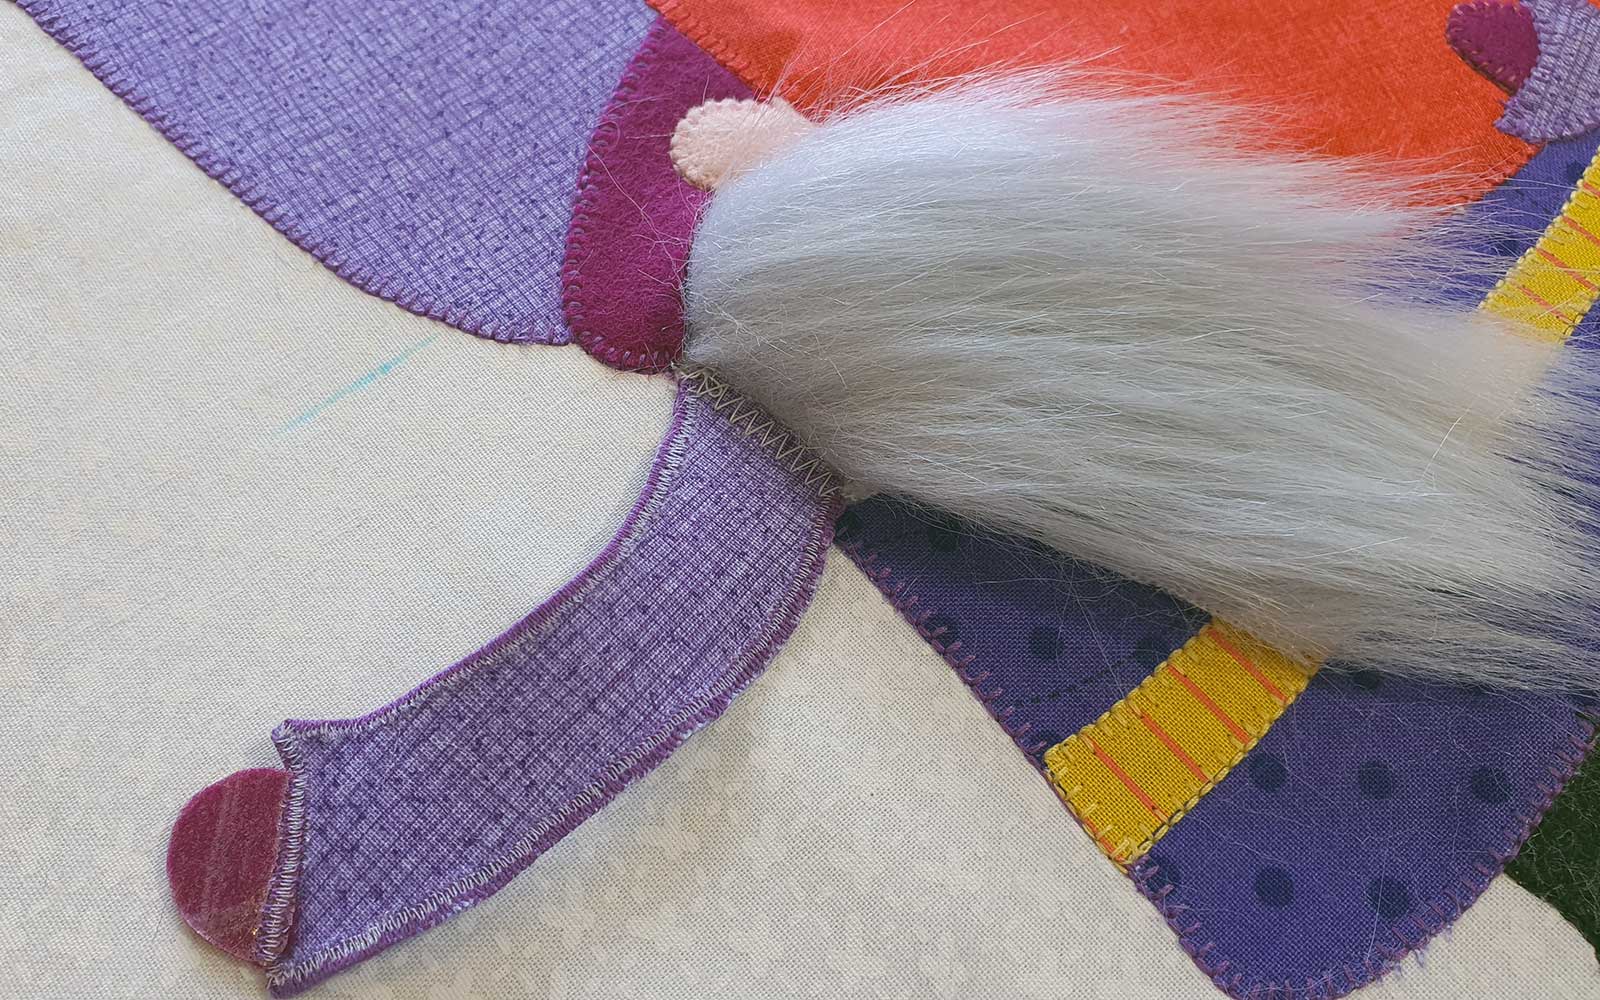 Purple arm of gnome on white fabric